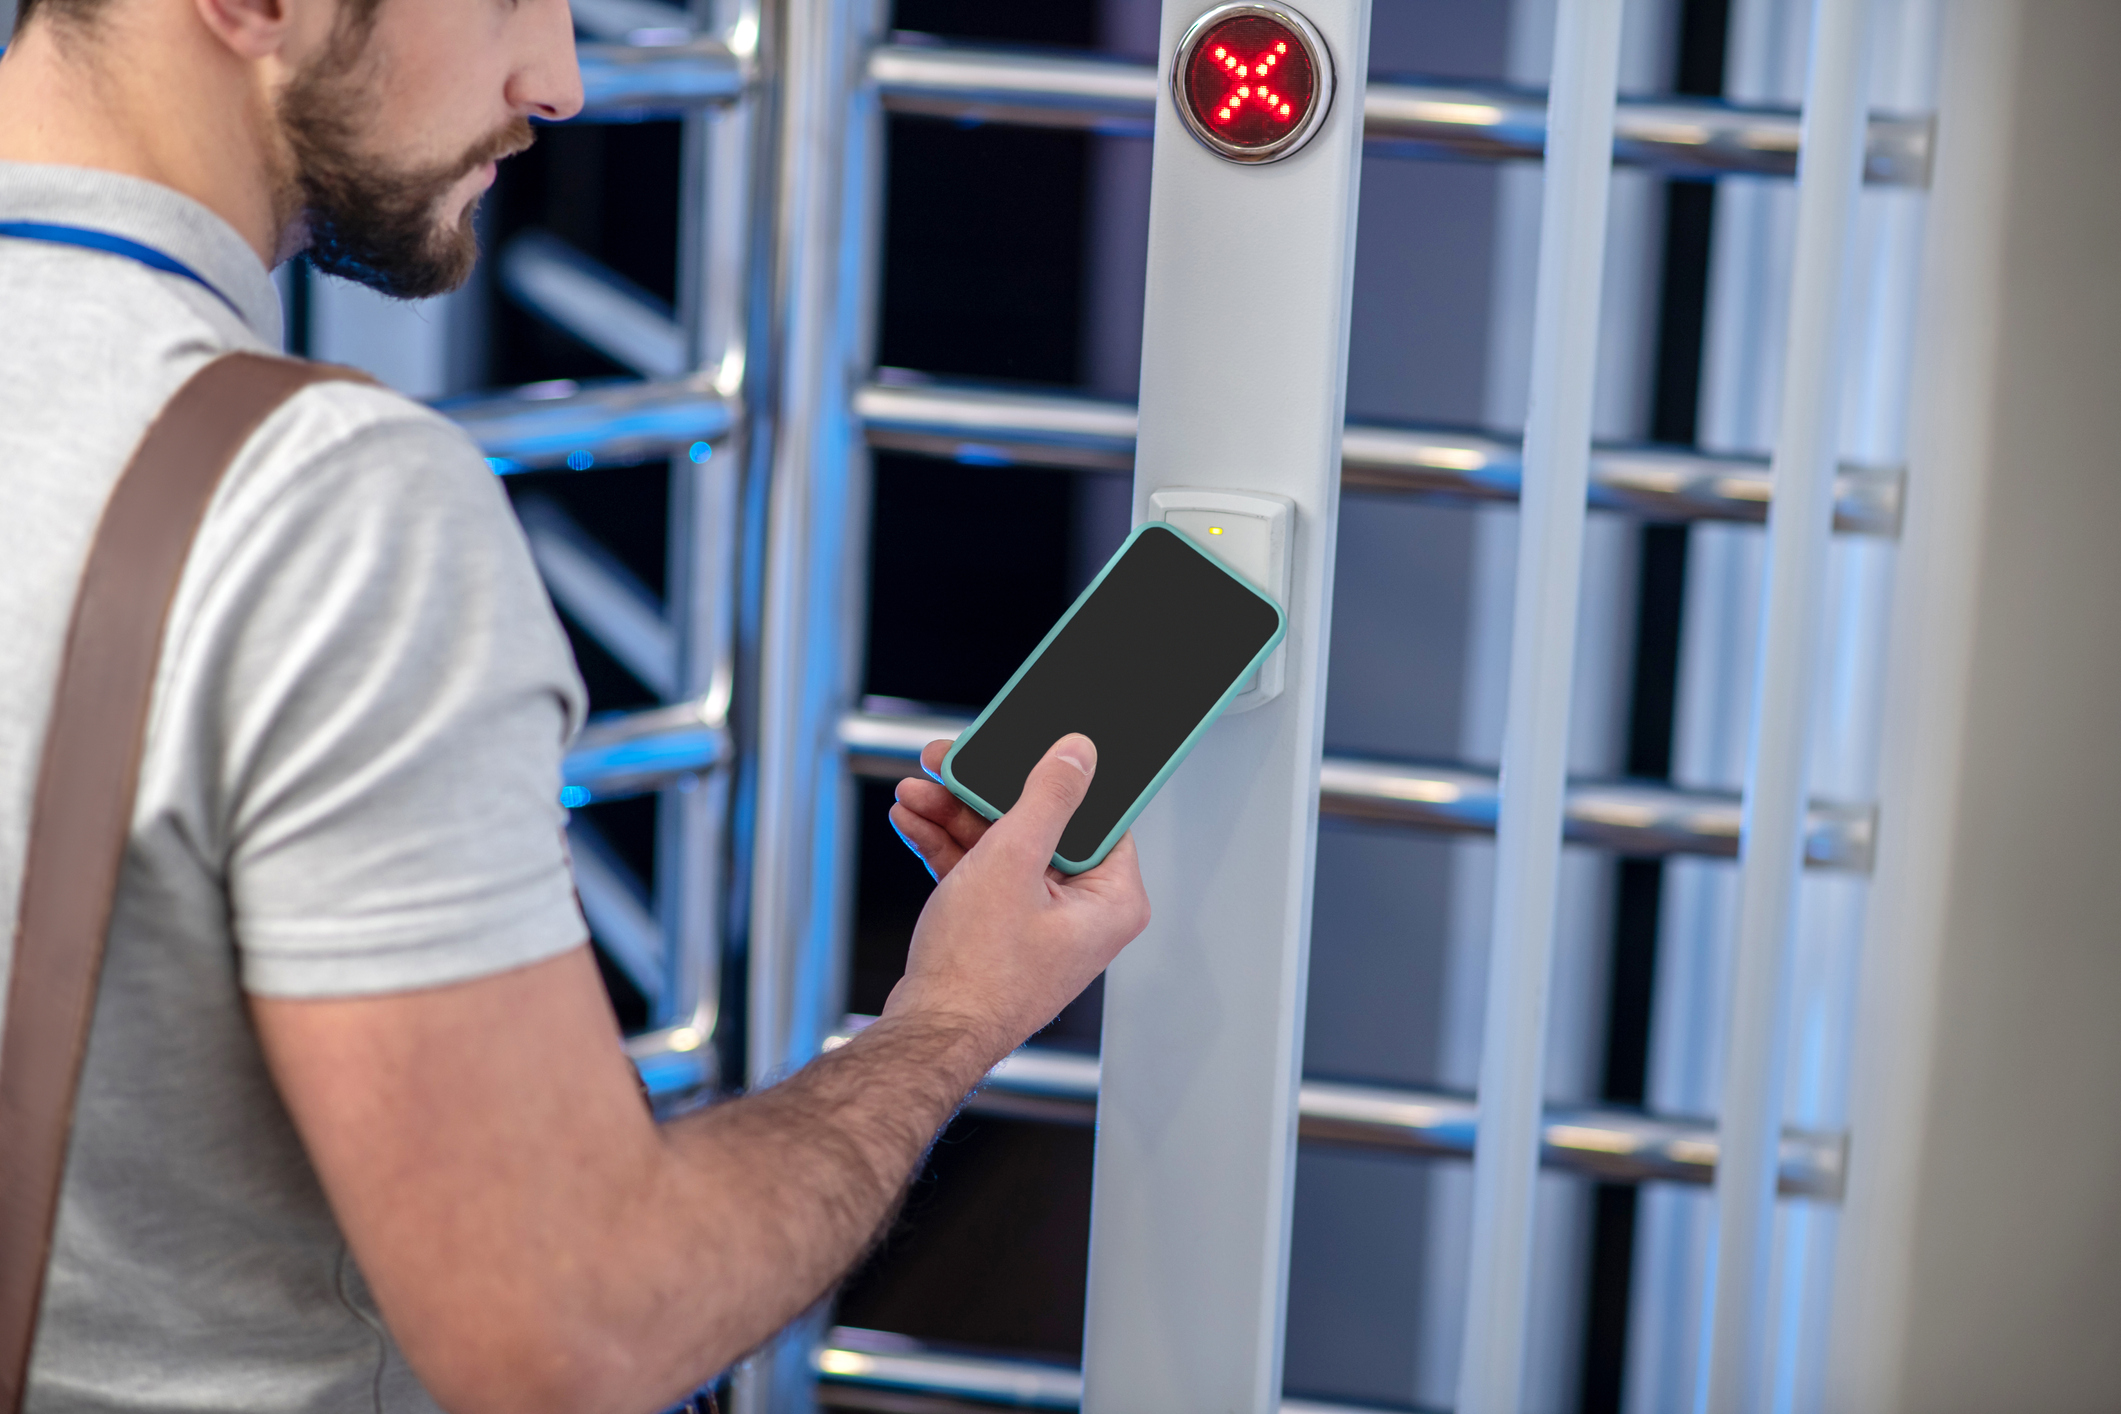 Access Control Systems & Business Security | Baton Rouge